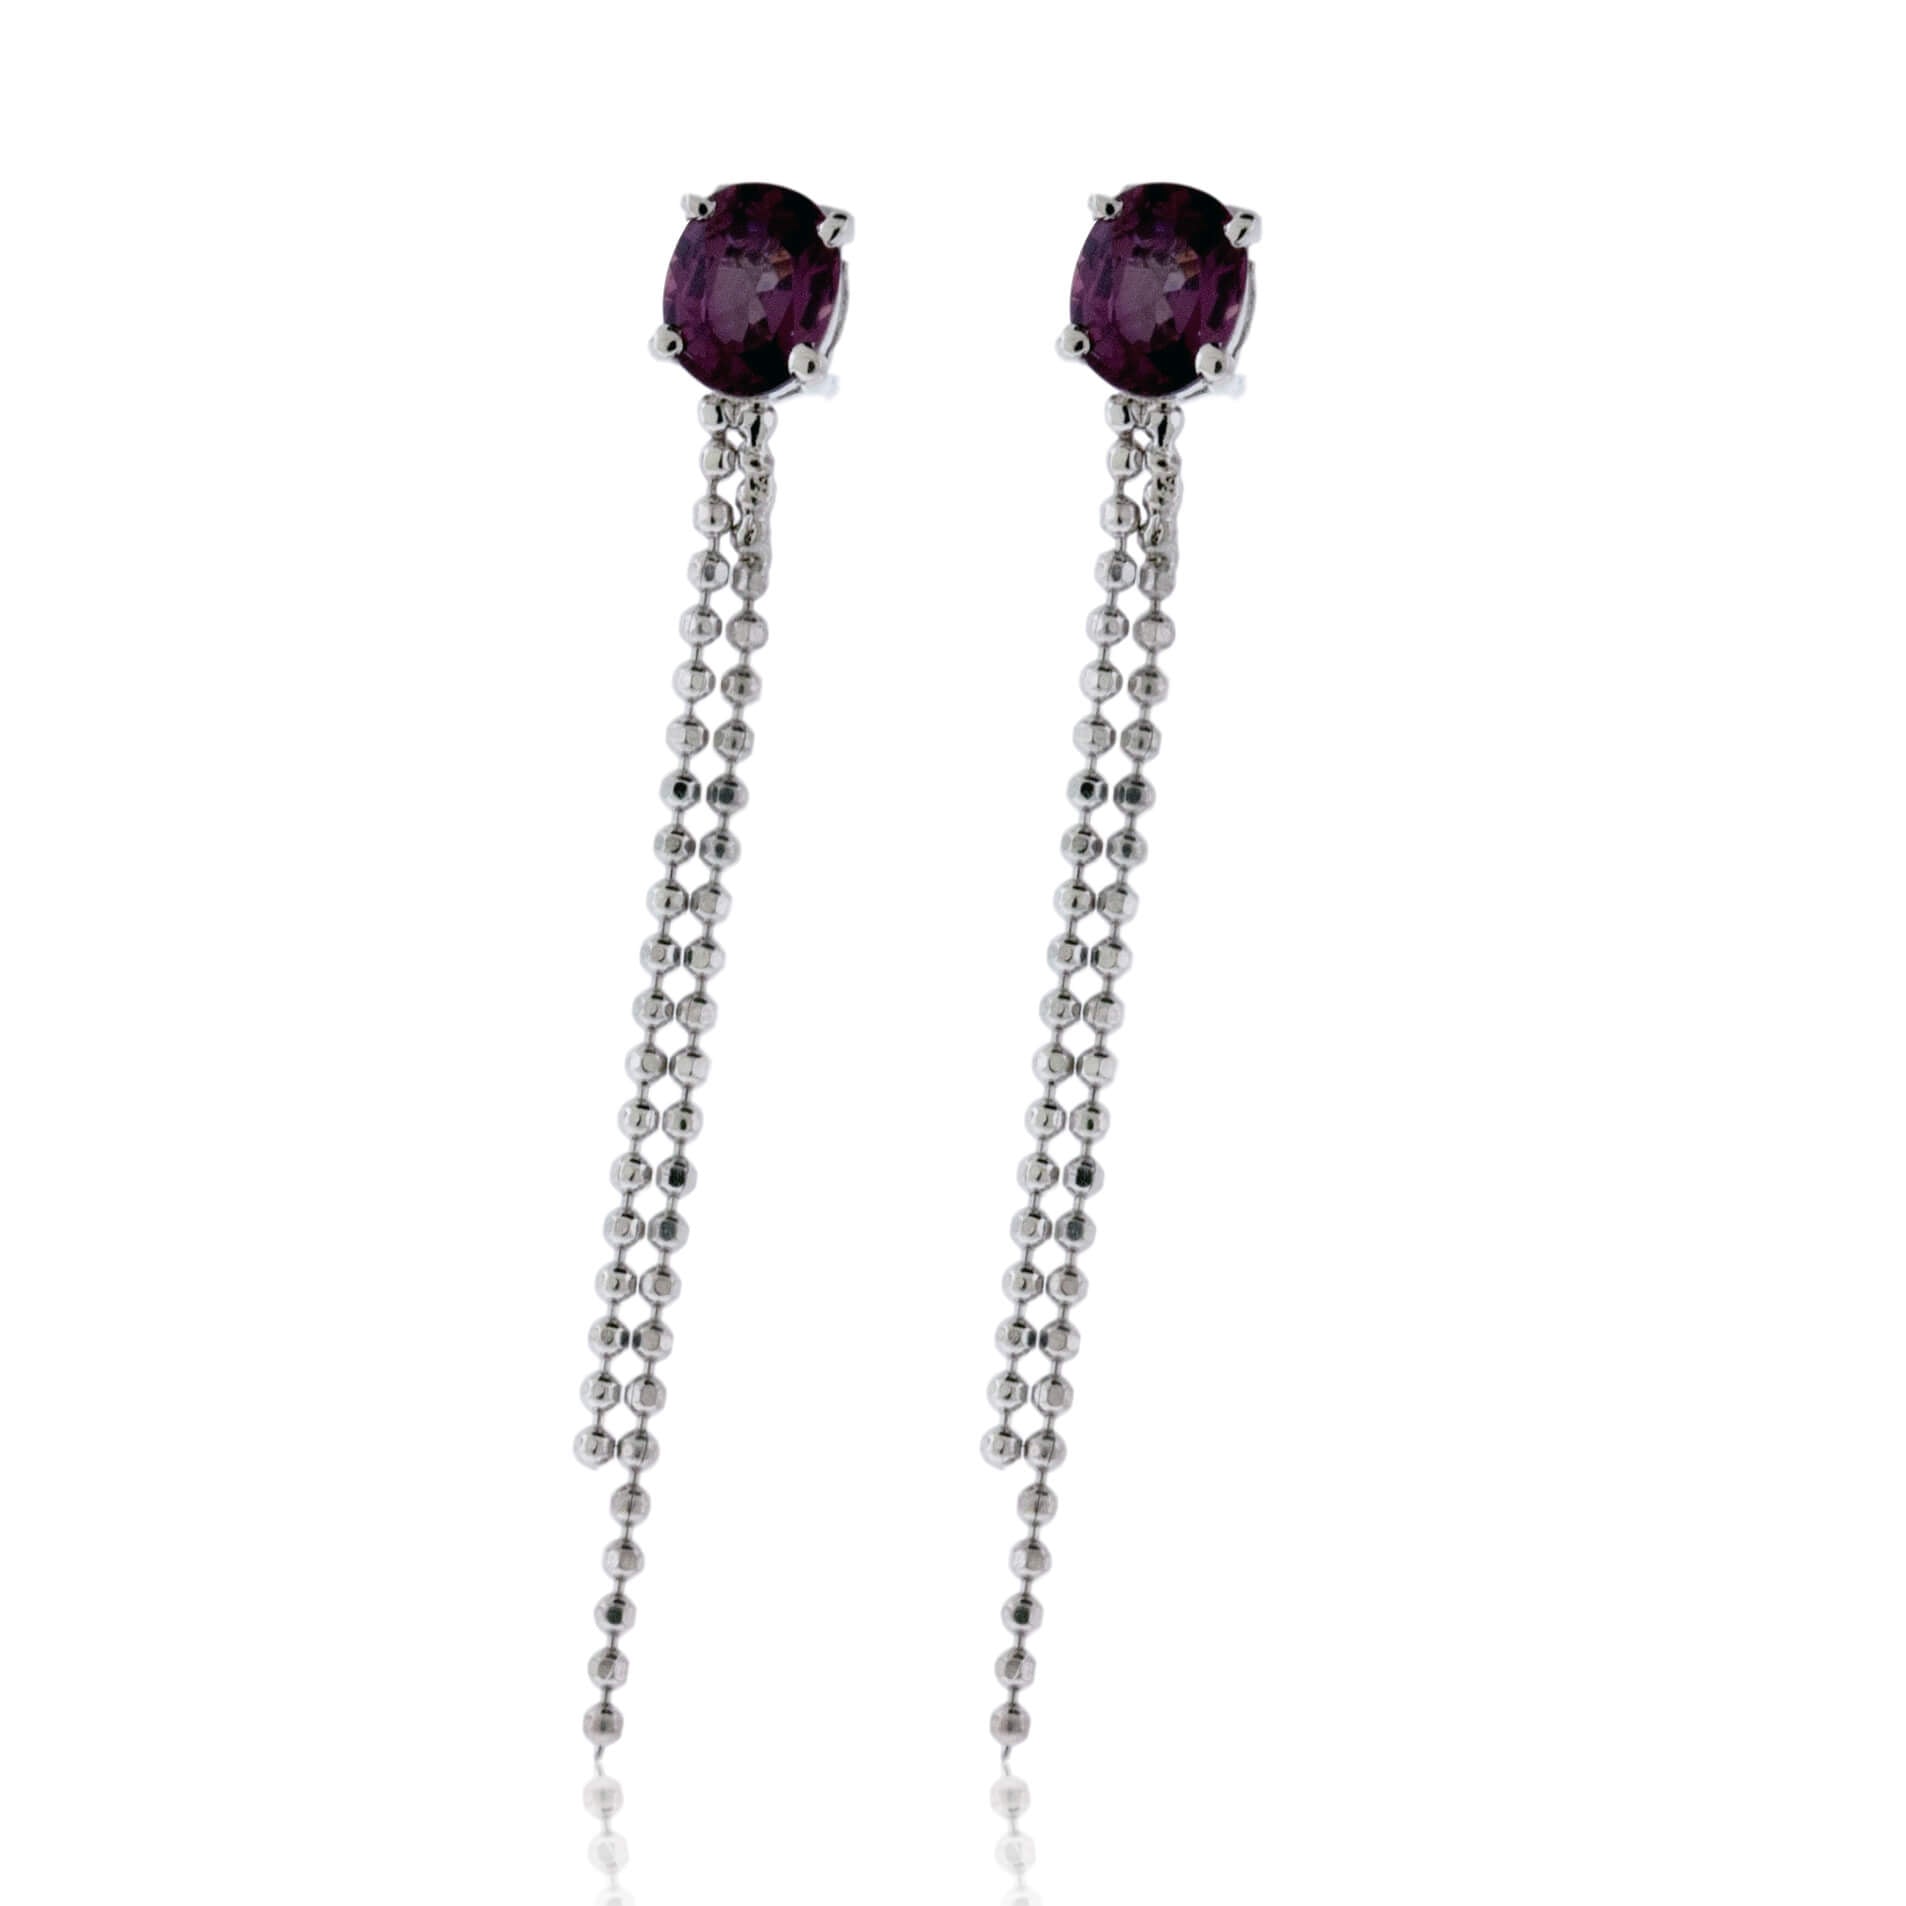 Maroon Color Traditional Stud Earrings for Women | FashionCrab.com